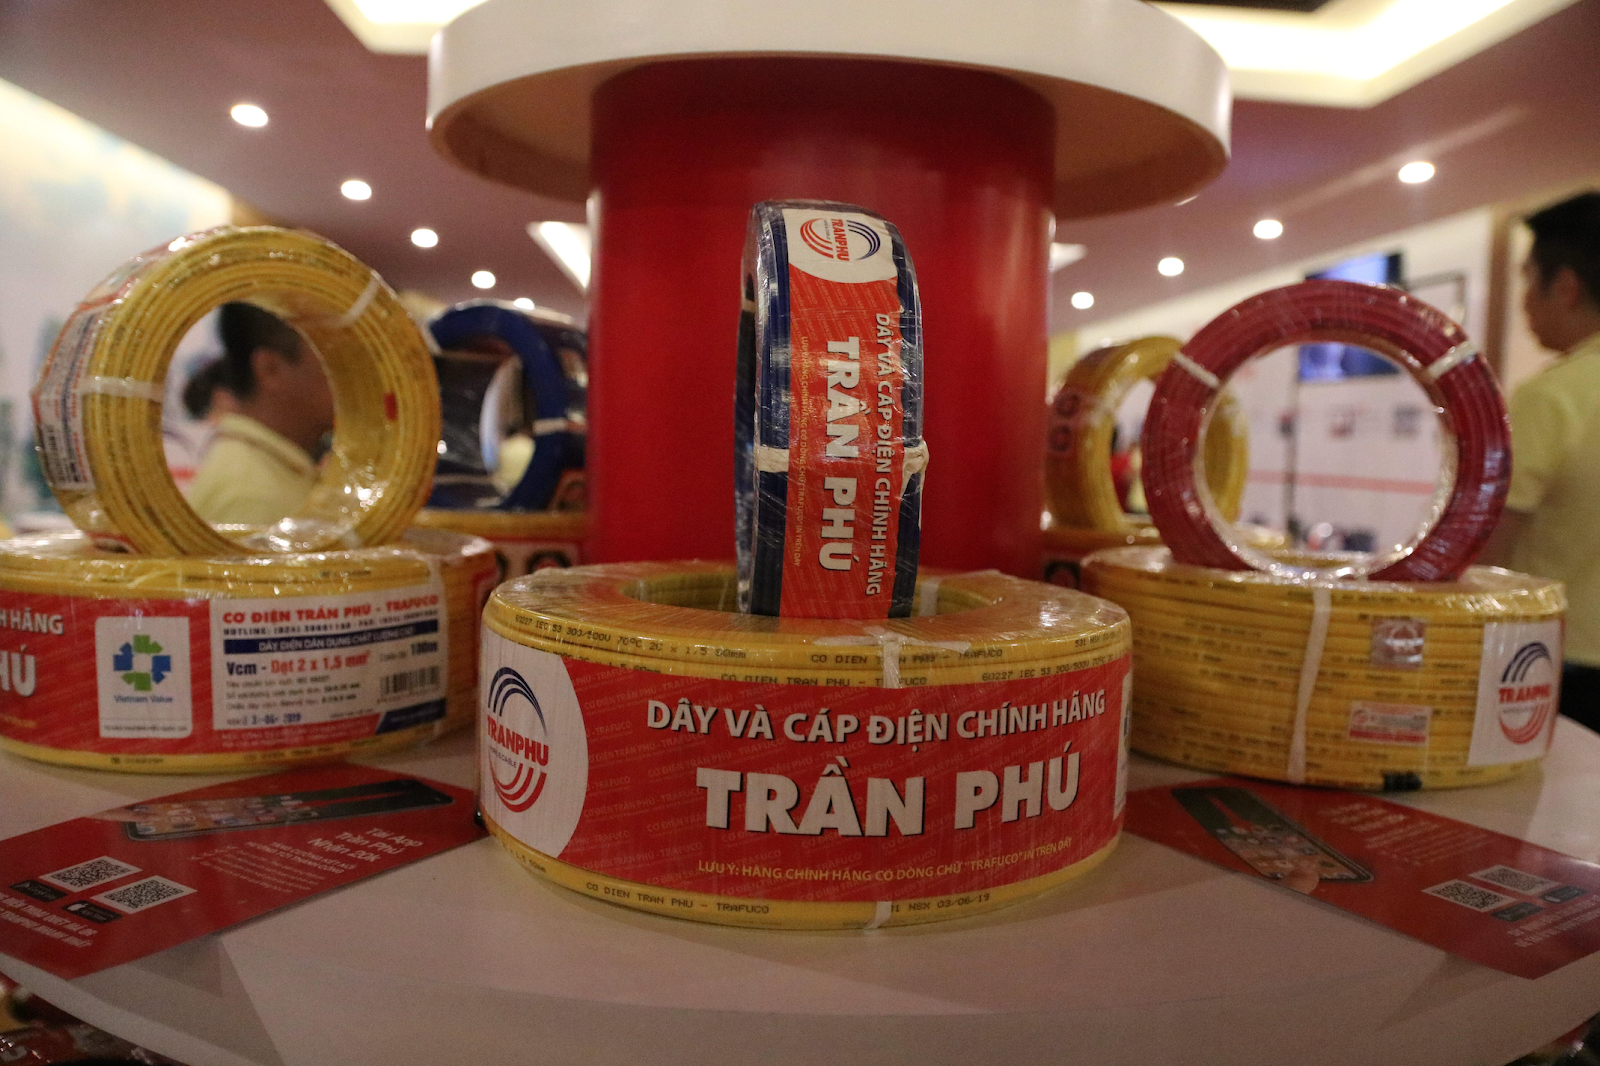 Tran Phu and the direction to catch up with the trend of the global electric cable industry